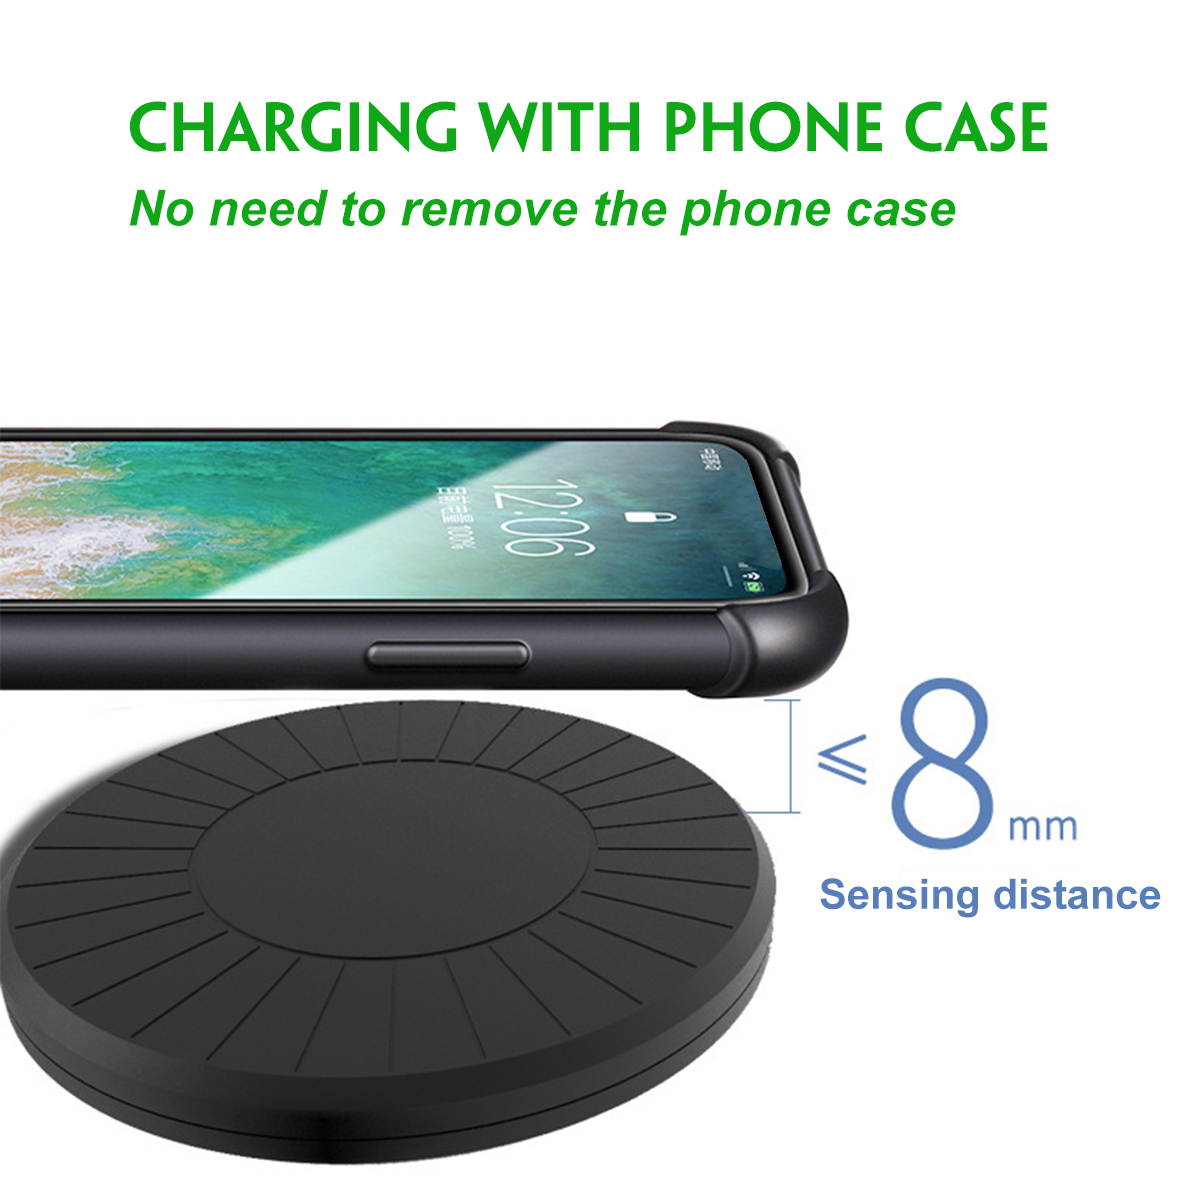 Bakeey 10W Wireless QI Fast Charger Charging Dock Stand Holder Universal For Samsung Galaxy Note 9 S8 S9 S10 Plus For iPhone X XS MAX 8 Plus